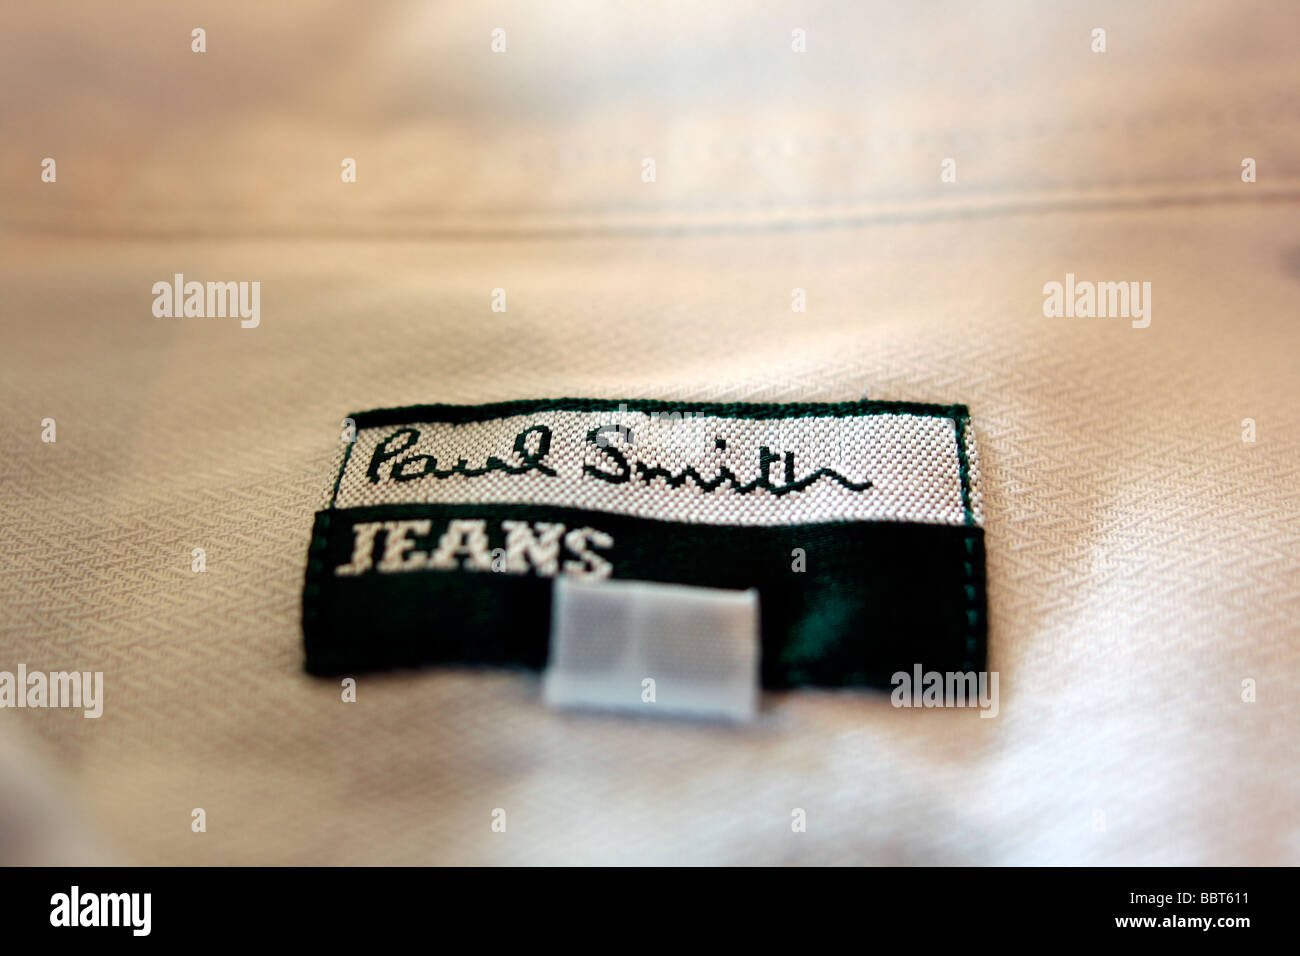 the Paul Smith Jeans label on a shirt Stock Photo - Alamy